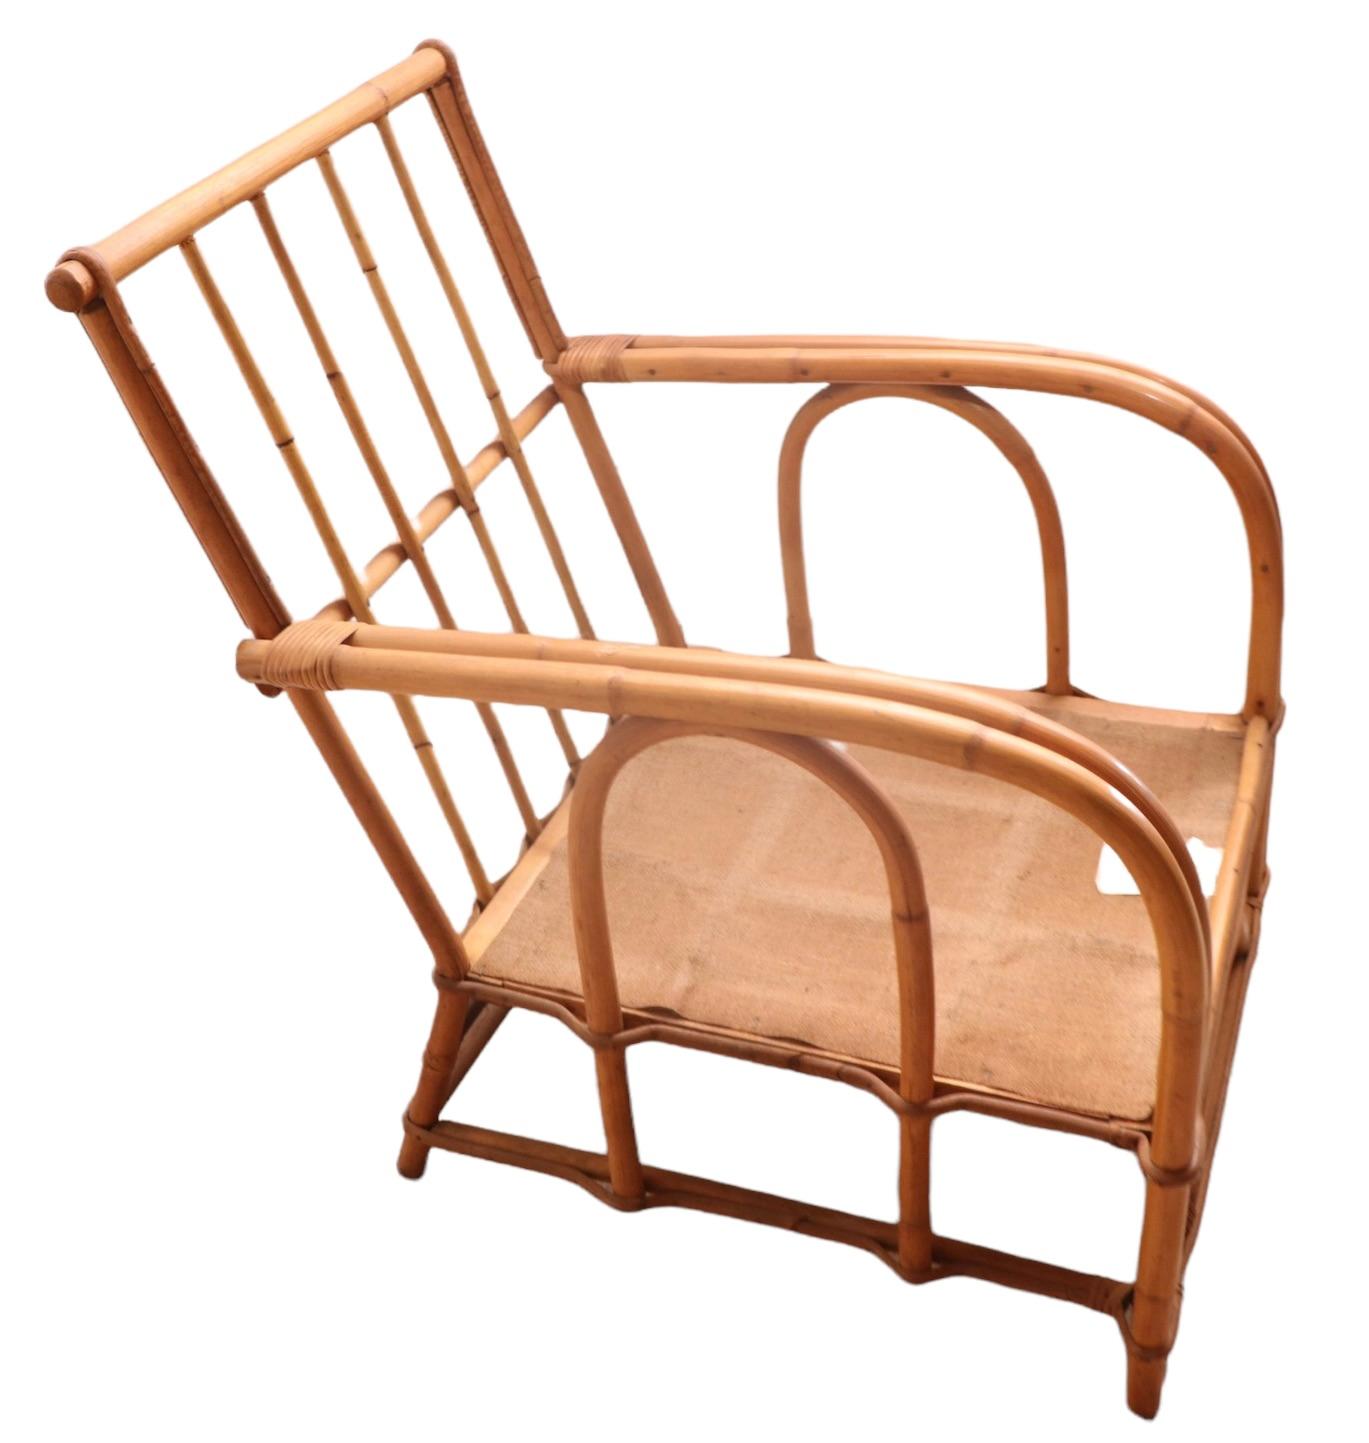 American Mid-Century Bamboo Lounge Chair by Superior Reed and Rattan Company 1960-1980